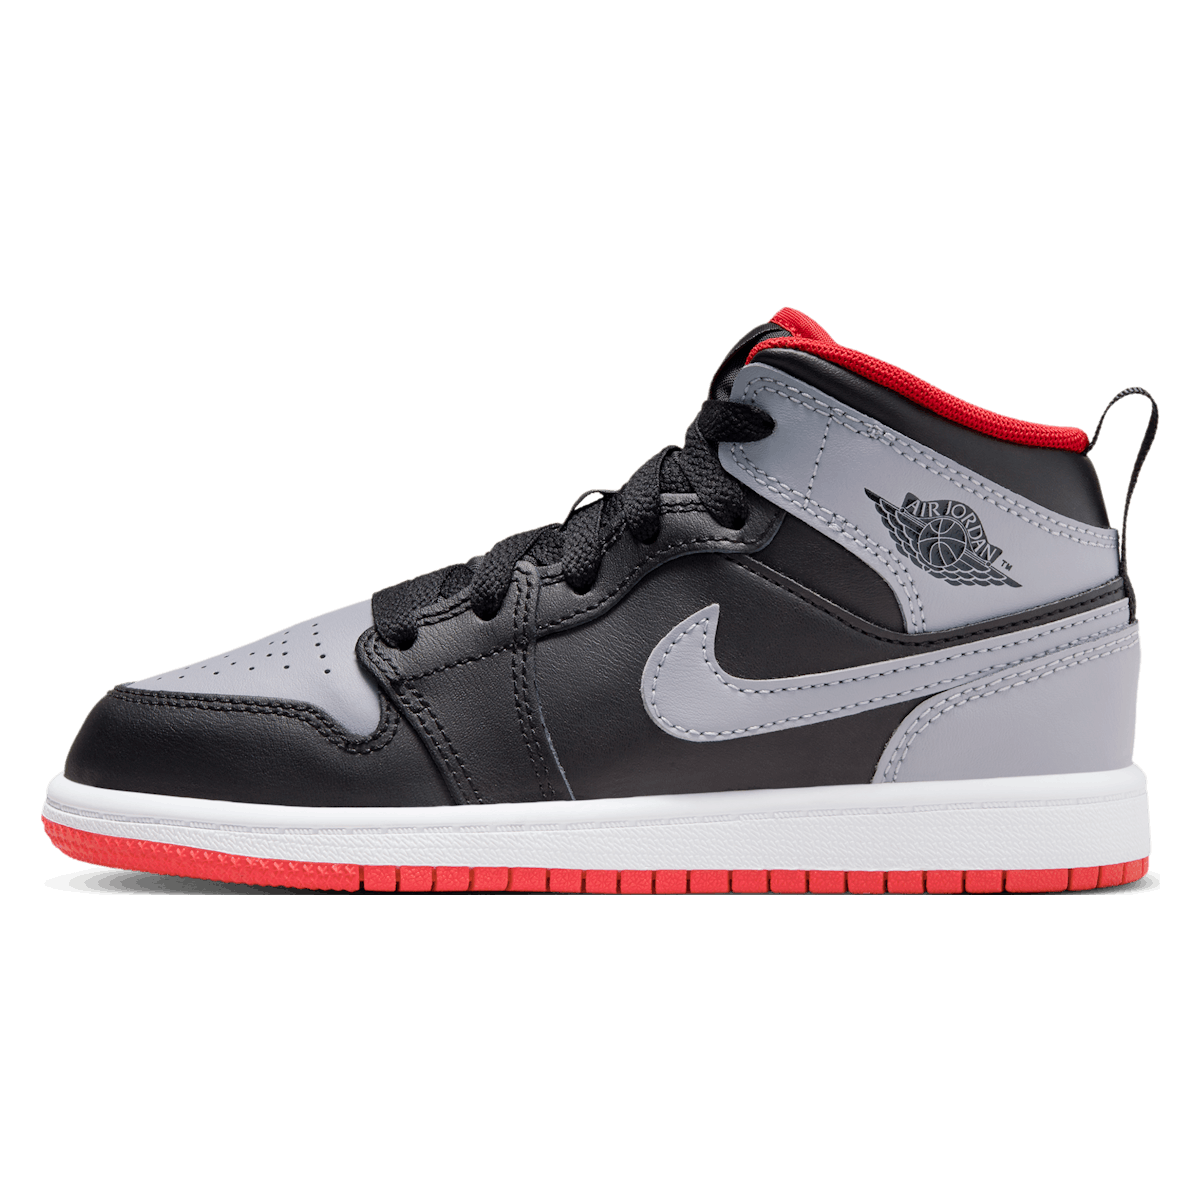 Air Jordan 1 Mid PS "Fire Red Cement Grey"